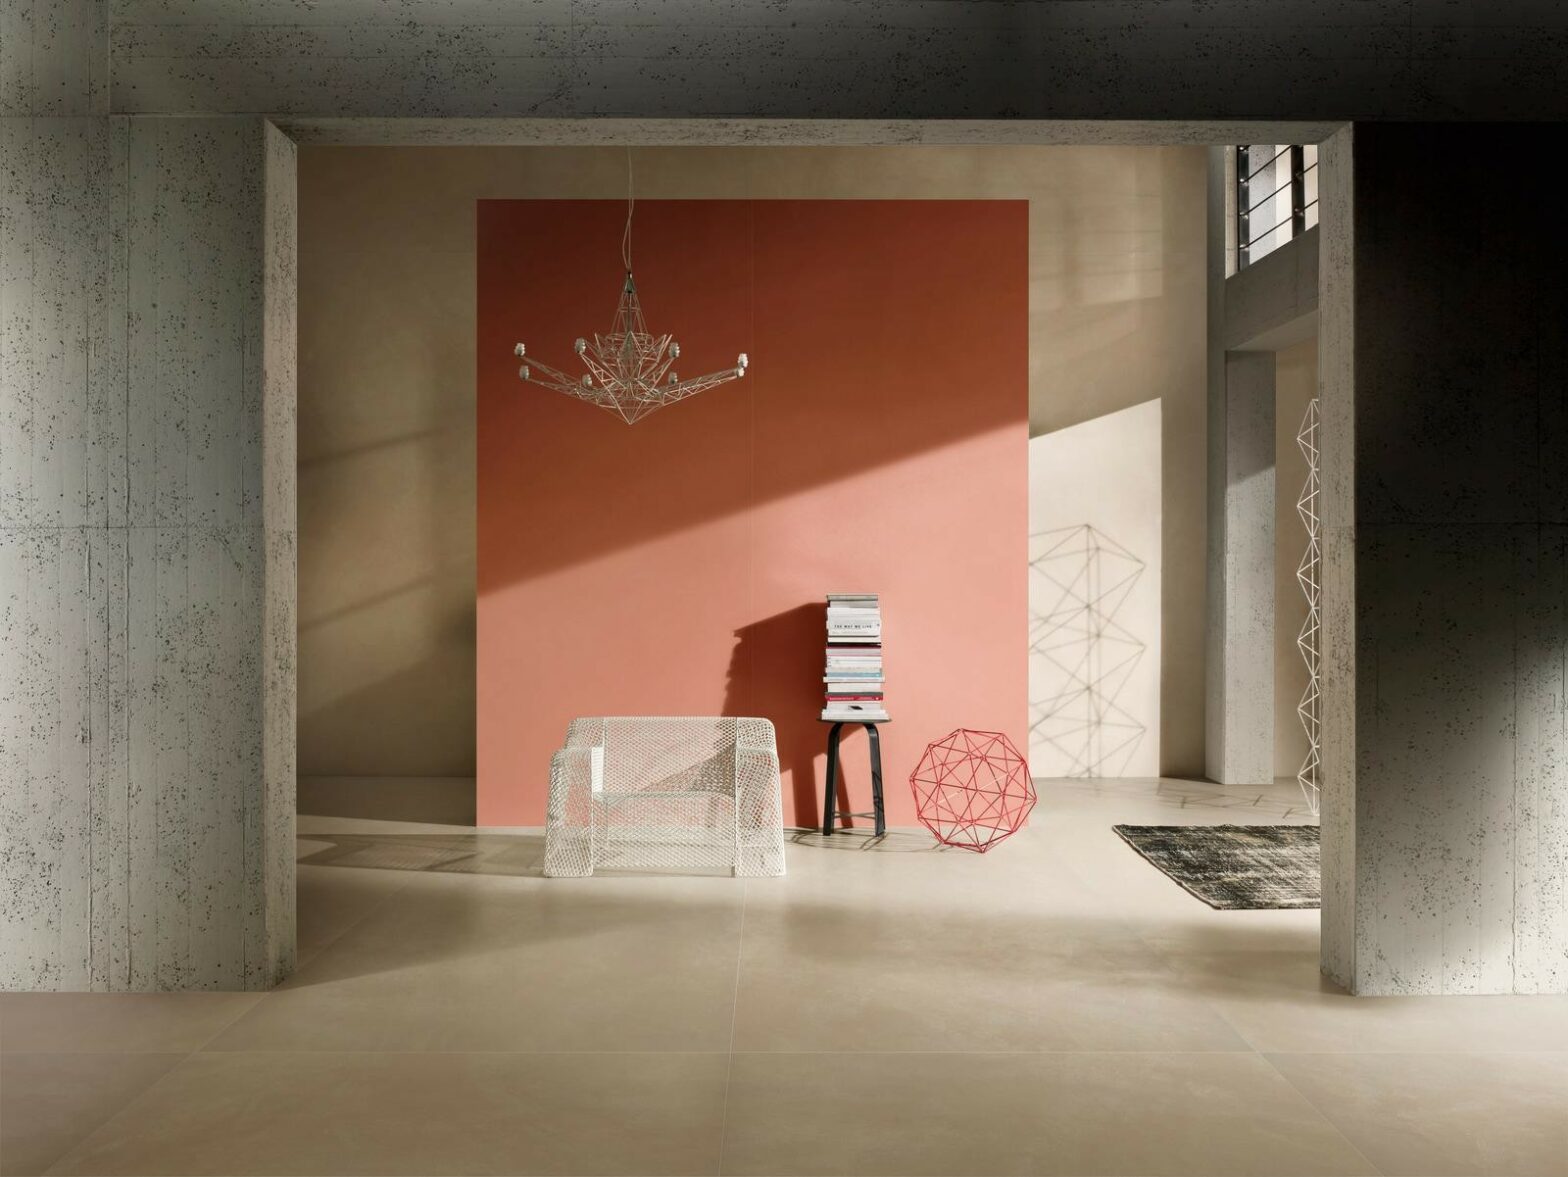 Slabs from "Grande" collections by Marazzi